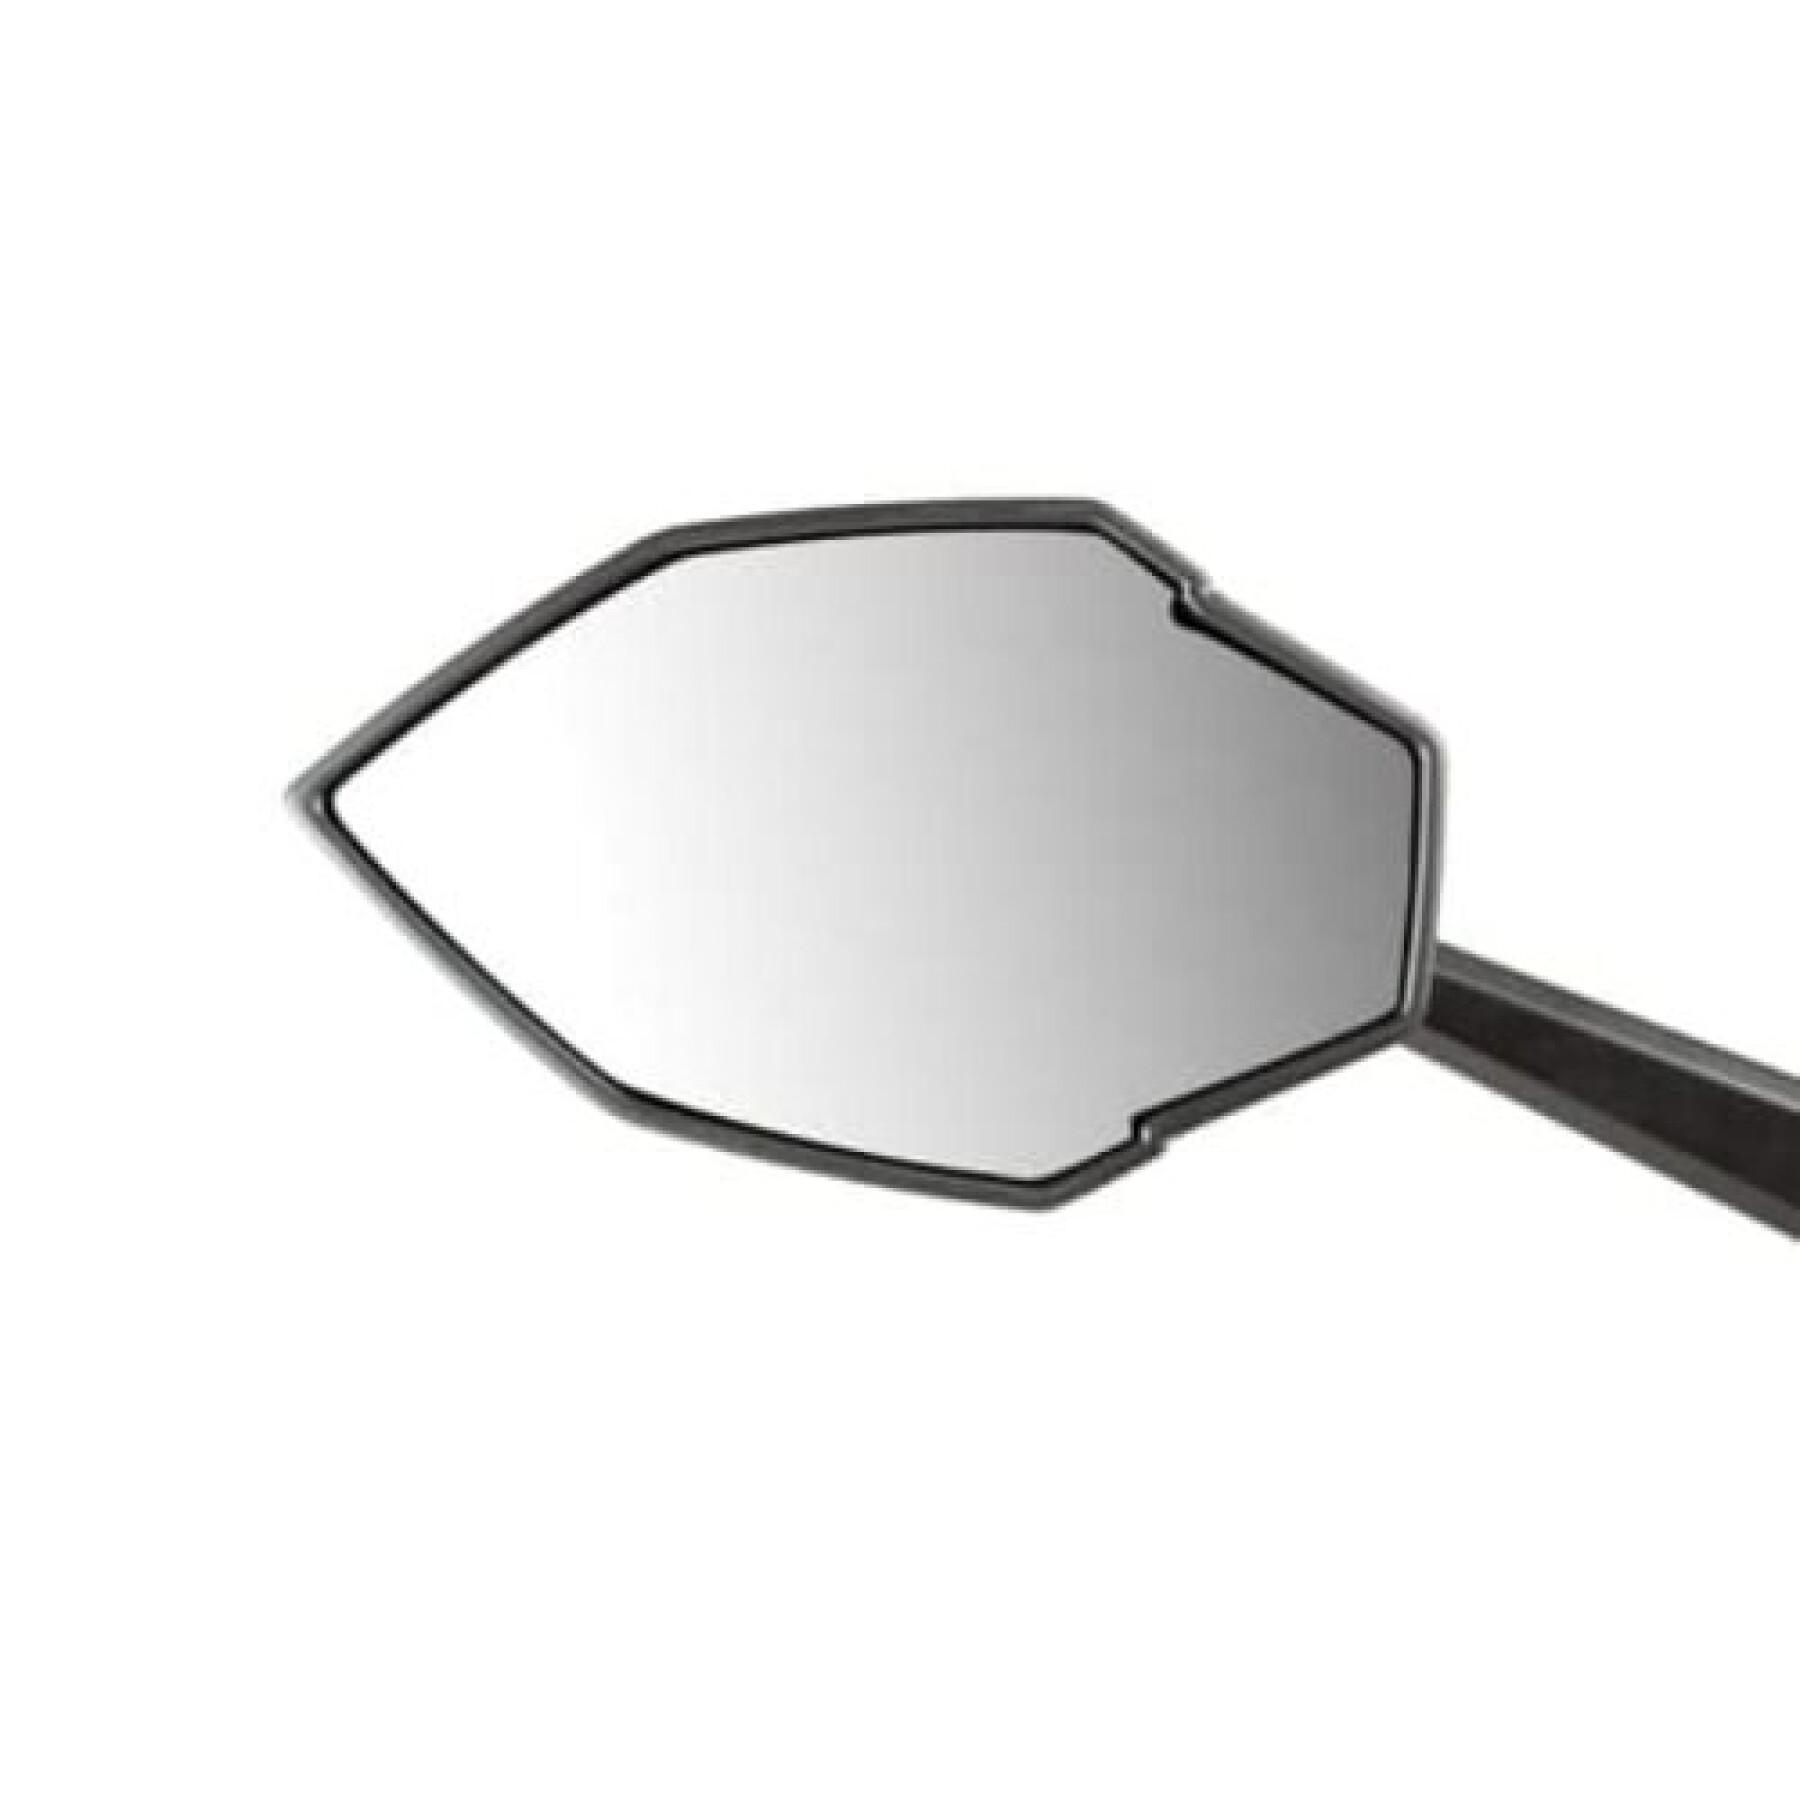 Reversible approved motorcycle mirror Chaft skyline